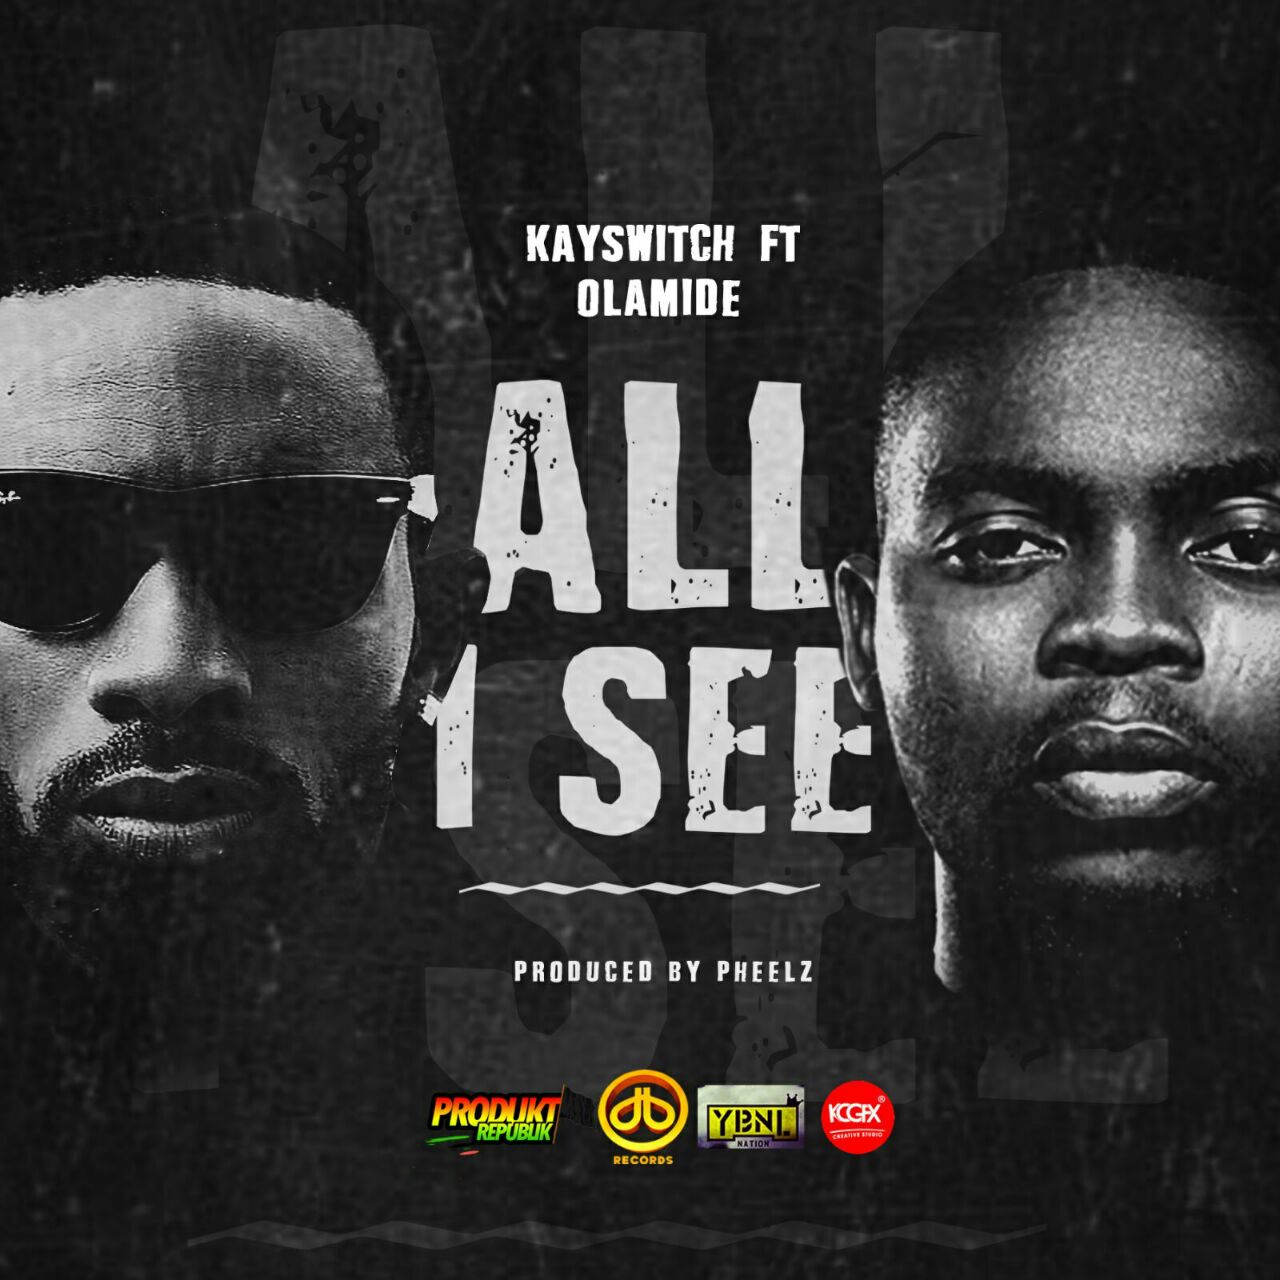 KaySwitch Ft Olamide - All I See Prod. By Pheelz